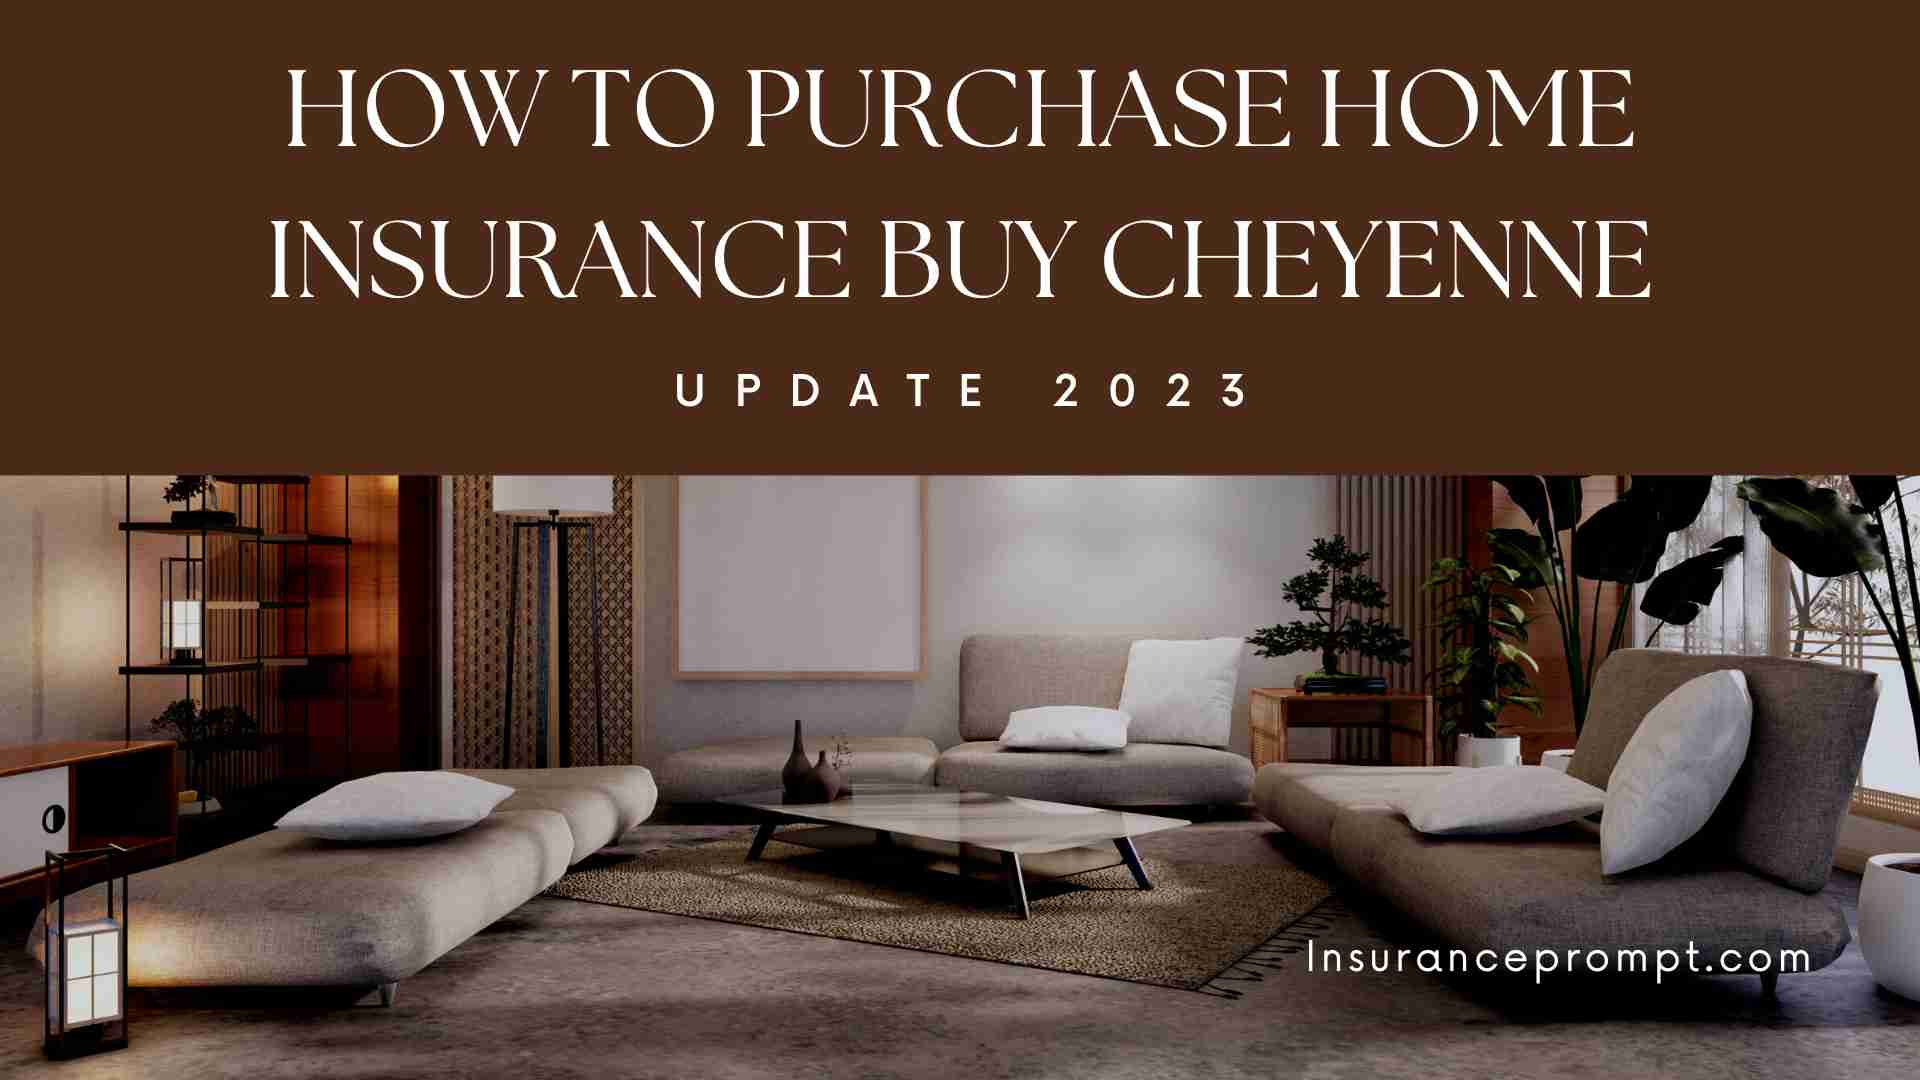 How To Purchase Home Insurance Buy Cheyenne 2023